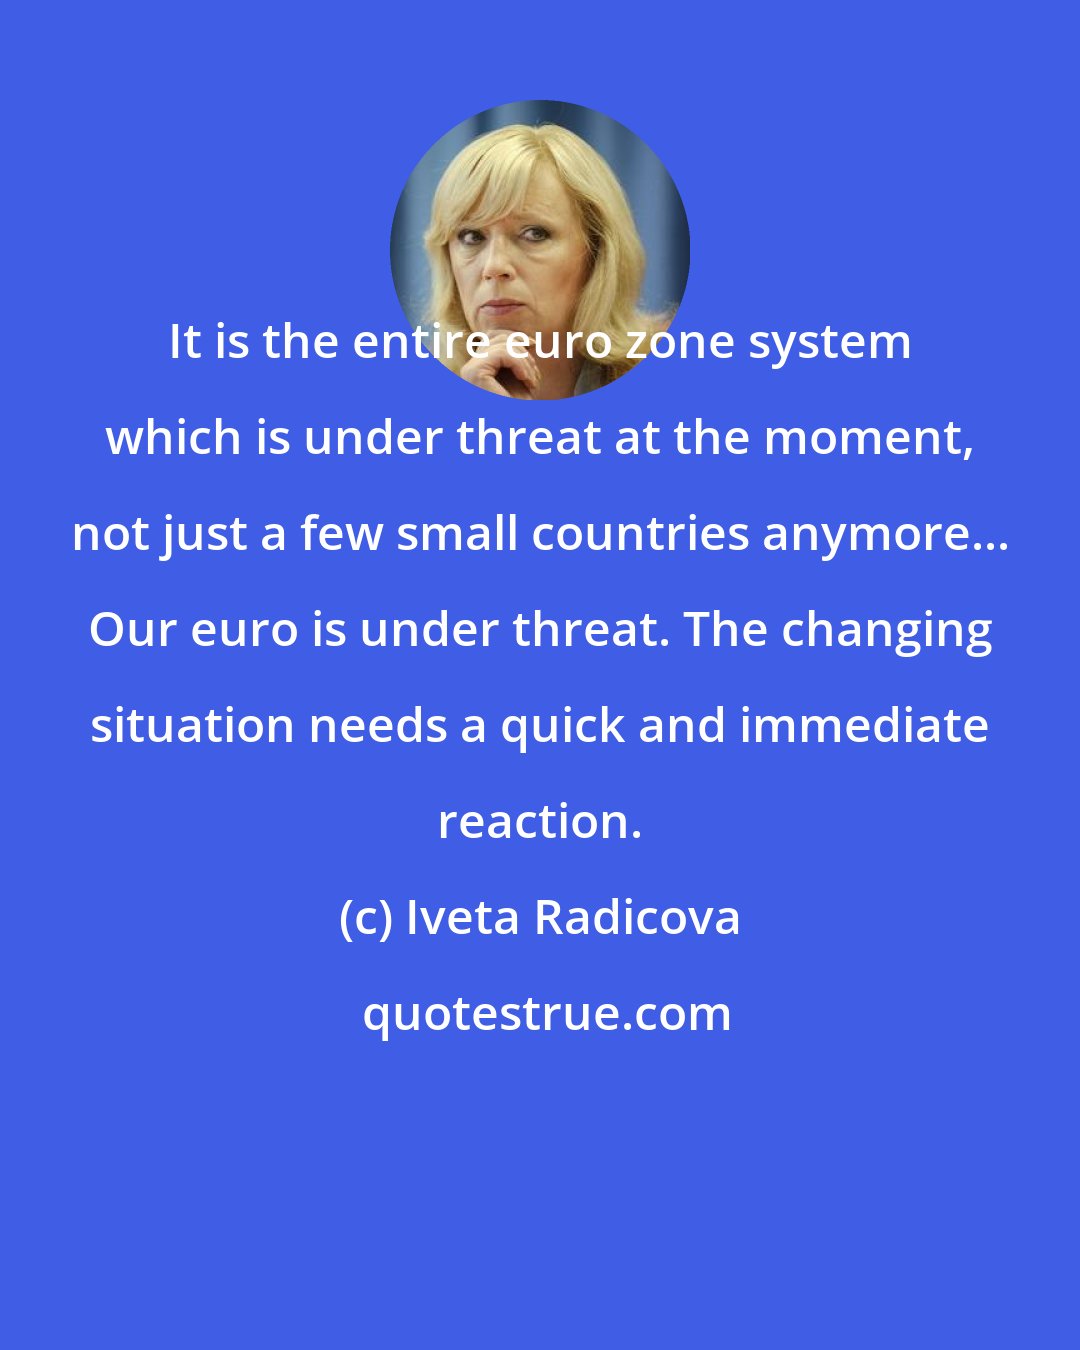 Iveta Radicova: It is the entire euro zone system which is under threat at the moment, not just a few small countries anymore... Our euro is under threat. The changing situation needs a quick and immediate reaction.